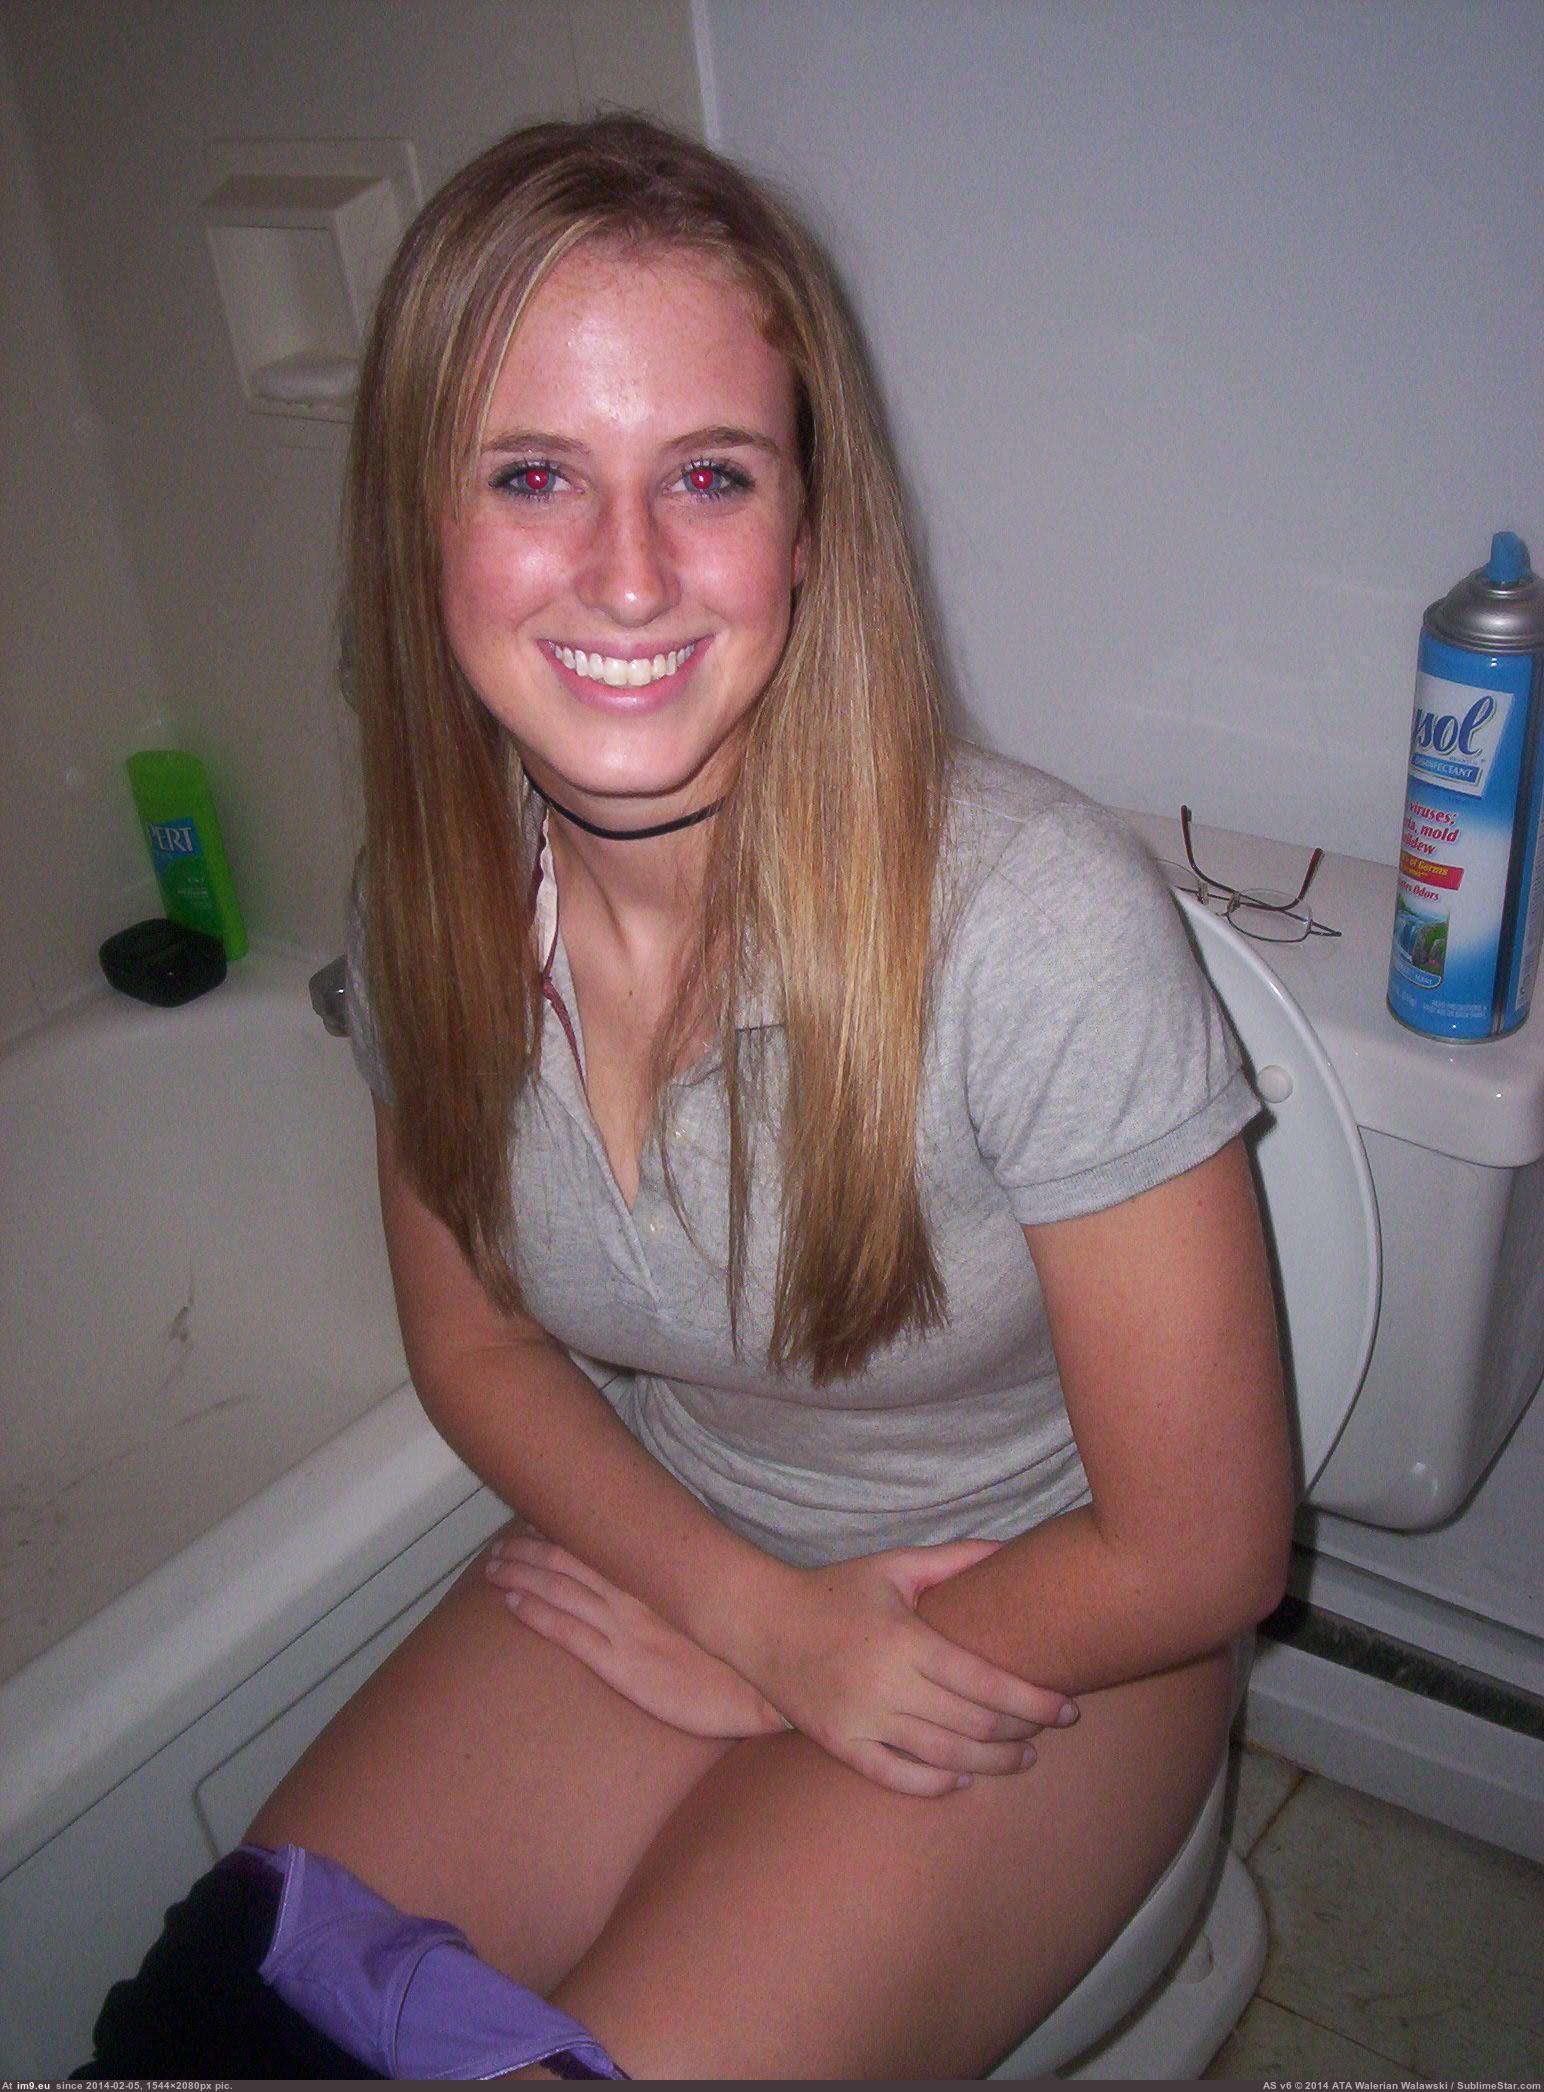 young-teen-girls-pissing-on-toilets-23-wc-toilet-bowl-peeing-porn.jpg